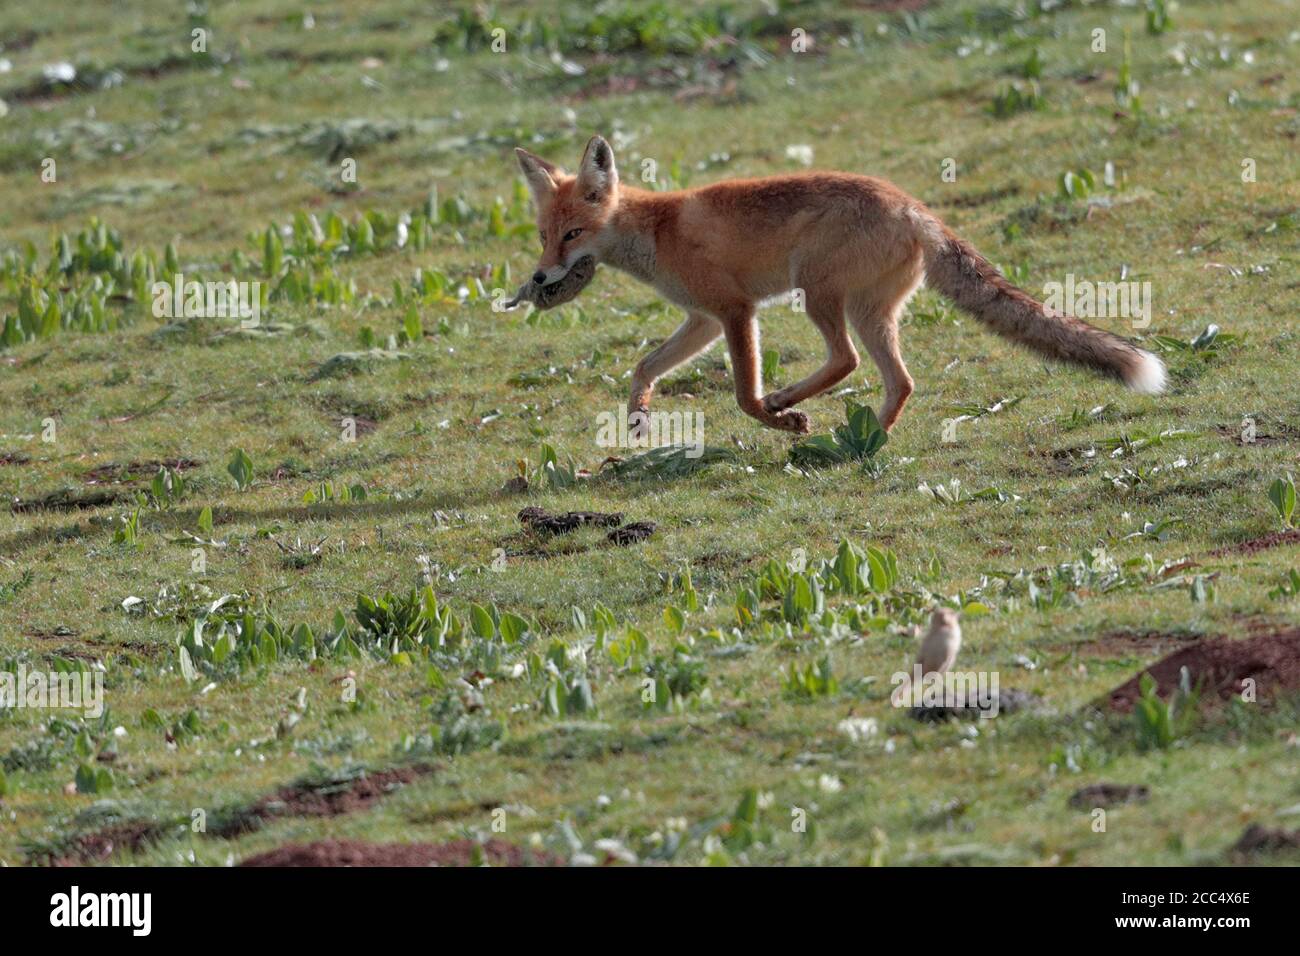 Red Fox (Vulpes vulpes), with pika sp. prey, roadside, S 308 road west of Yushu, Qinghai Province, China 23 August 2017 Stock Photo